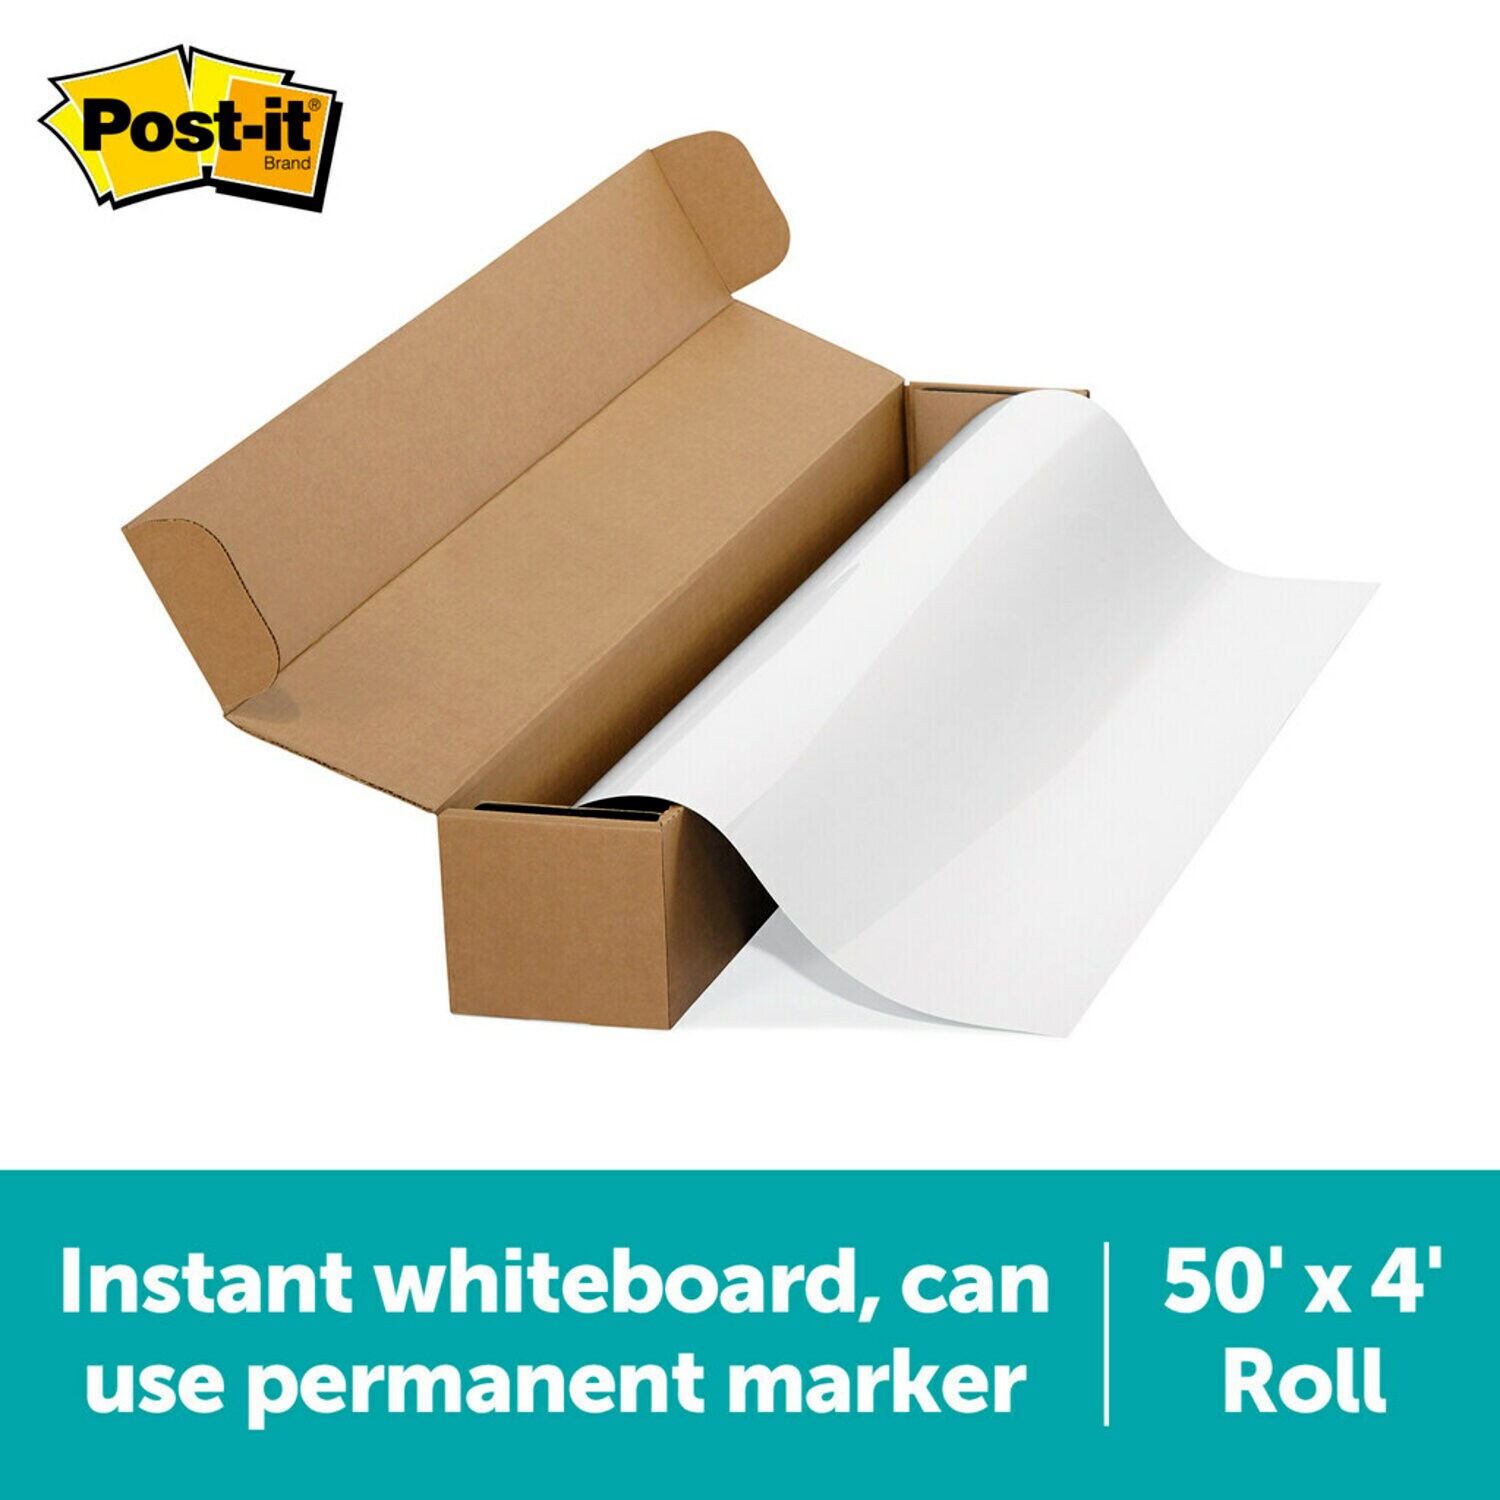 7100195630 - Post-it Flex Write Surface, The Permanent Marker Whiteboard Surface
FWS50x4, 50 ft x 4 ft